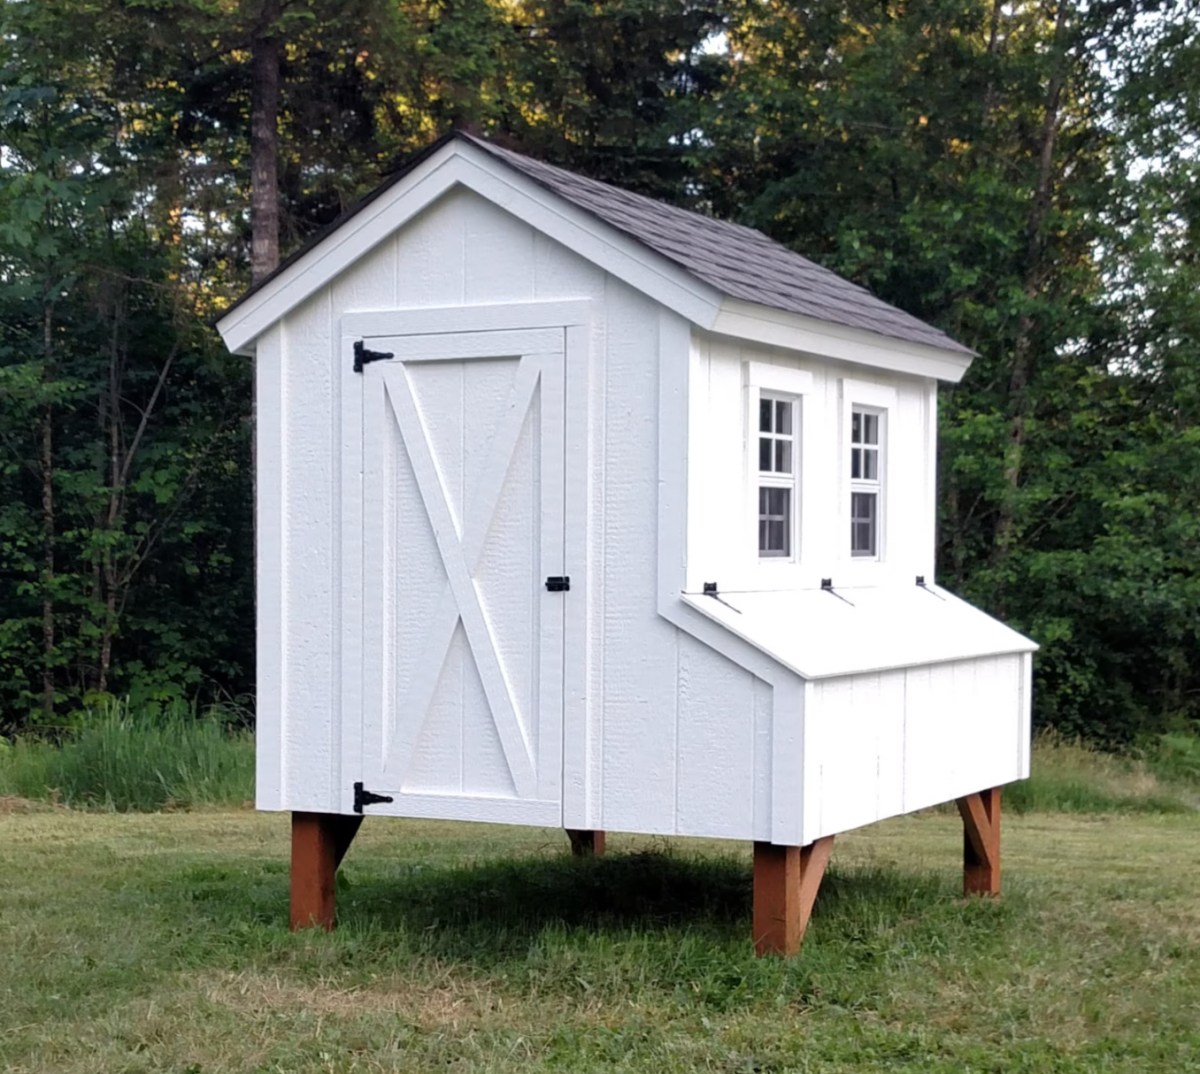 A white, country-style chicken coop elevated off the ground.